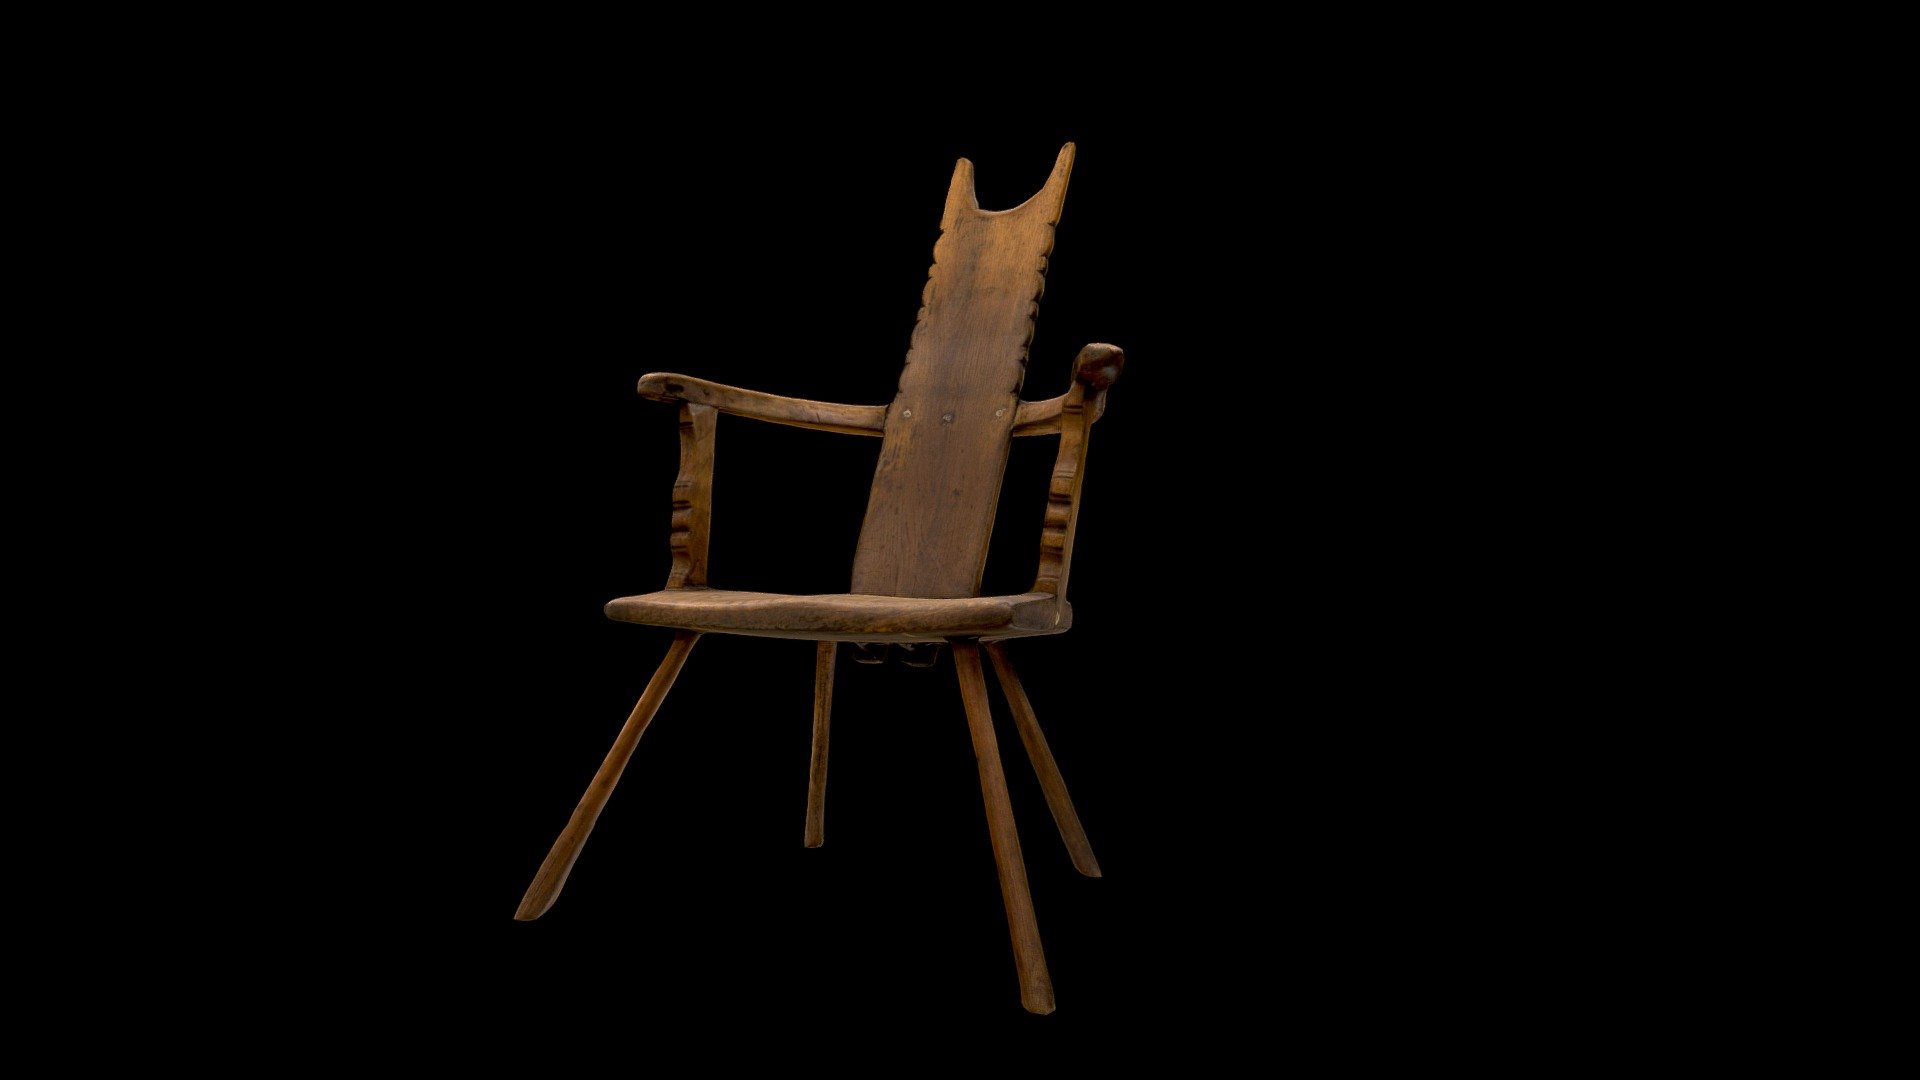 This chair was made sometime between 1701 and 1800 and used by a barber-surgeon to extract teeth. Anaesthetics did not exist, so no pain relief was offered.

Use our 3D barber-surgeon's chair model in the classroom to bring your curriculum teaching to life: https://learning-resources.sciencemuseum.org.uk/resources/barber-surgeons-chair

Find out more in the Science Museum Group online collection: https://collection.sciencemuseumgroup.org.uk/objects/co100374/ - Barber-surgeon's chair - Download Free 3D model by Science Museum Group (@sciencemuseum) 3d model